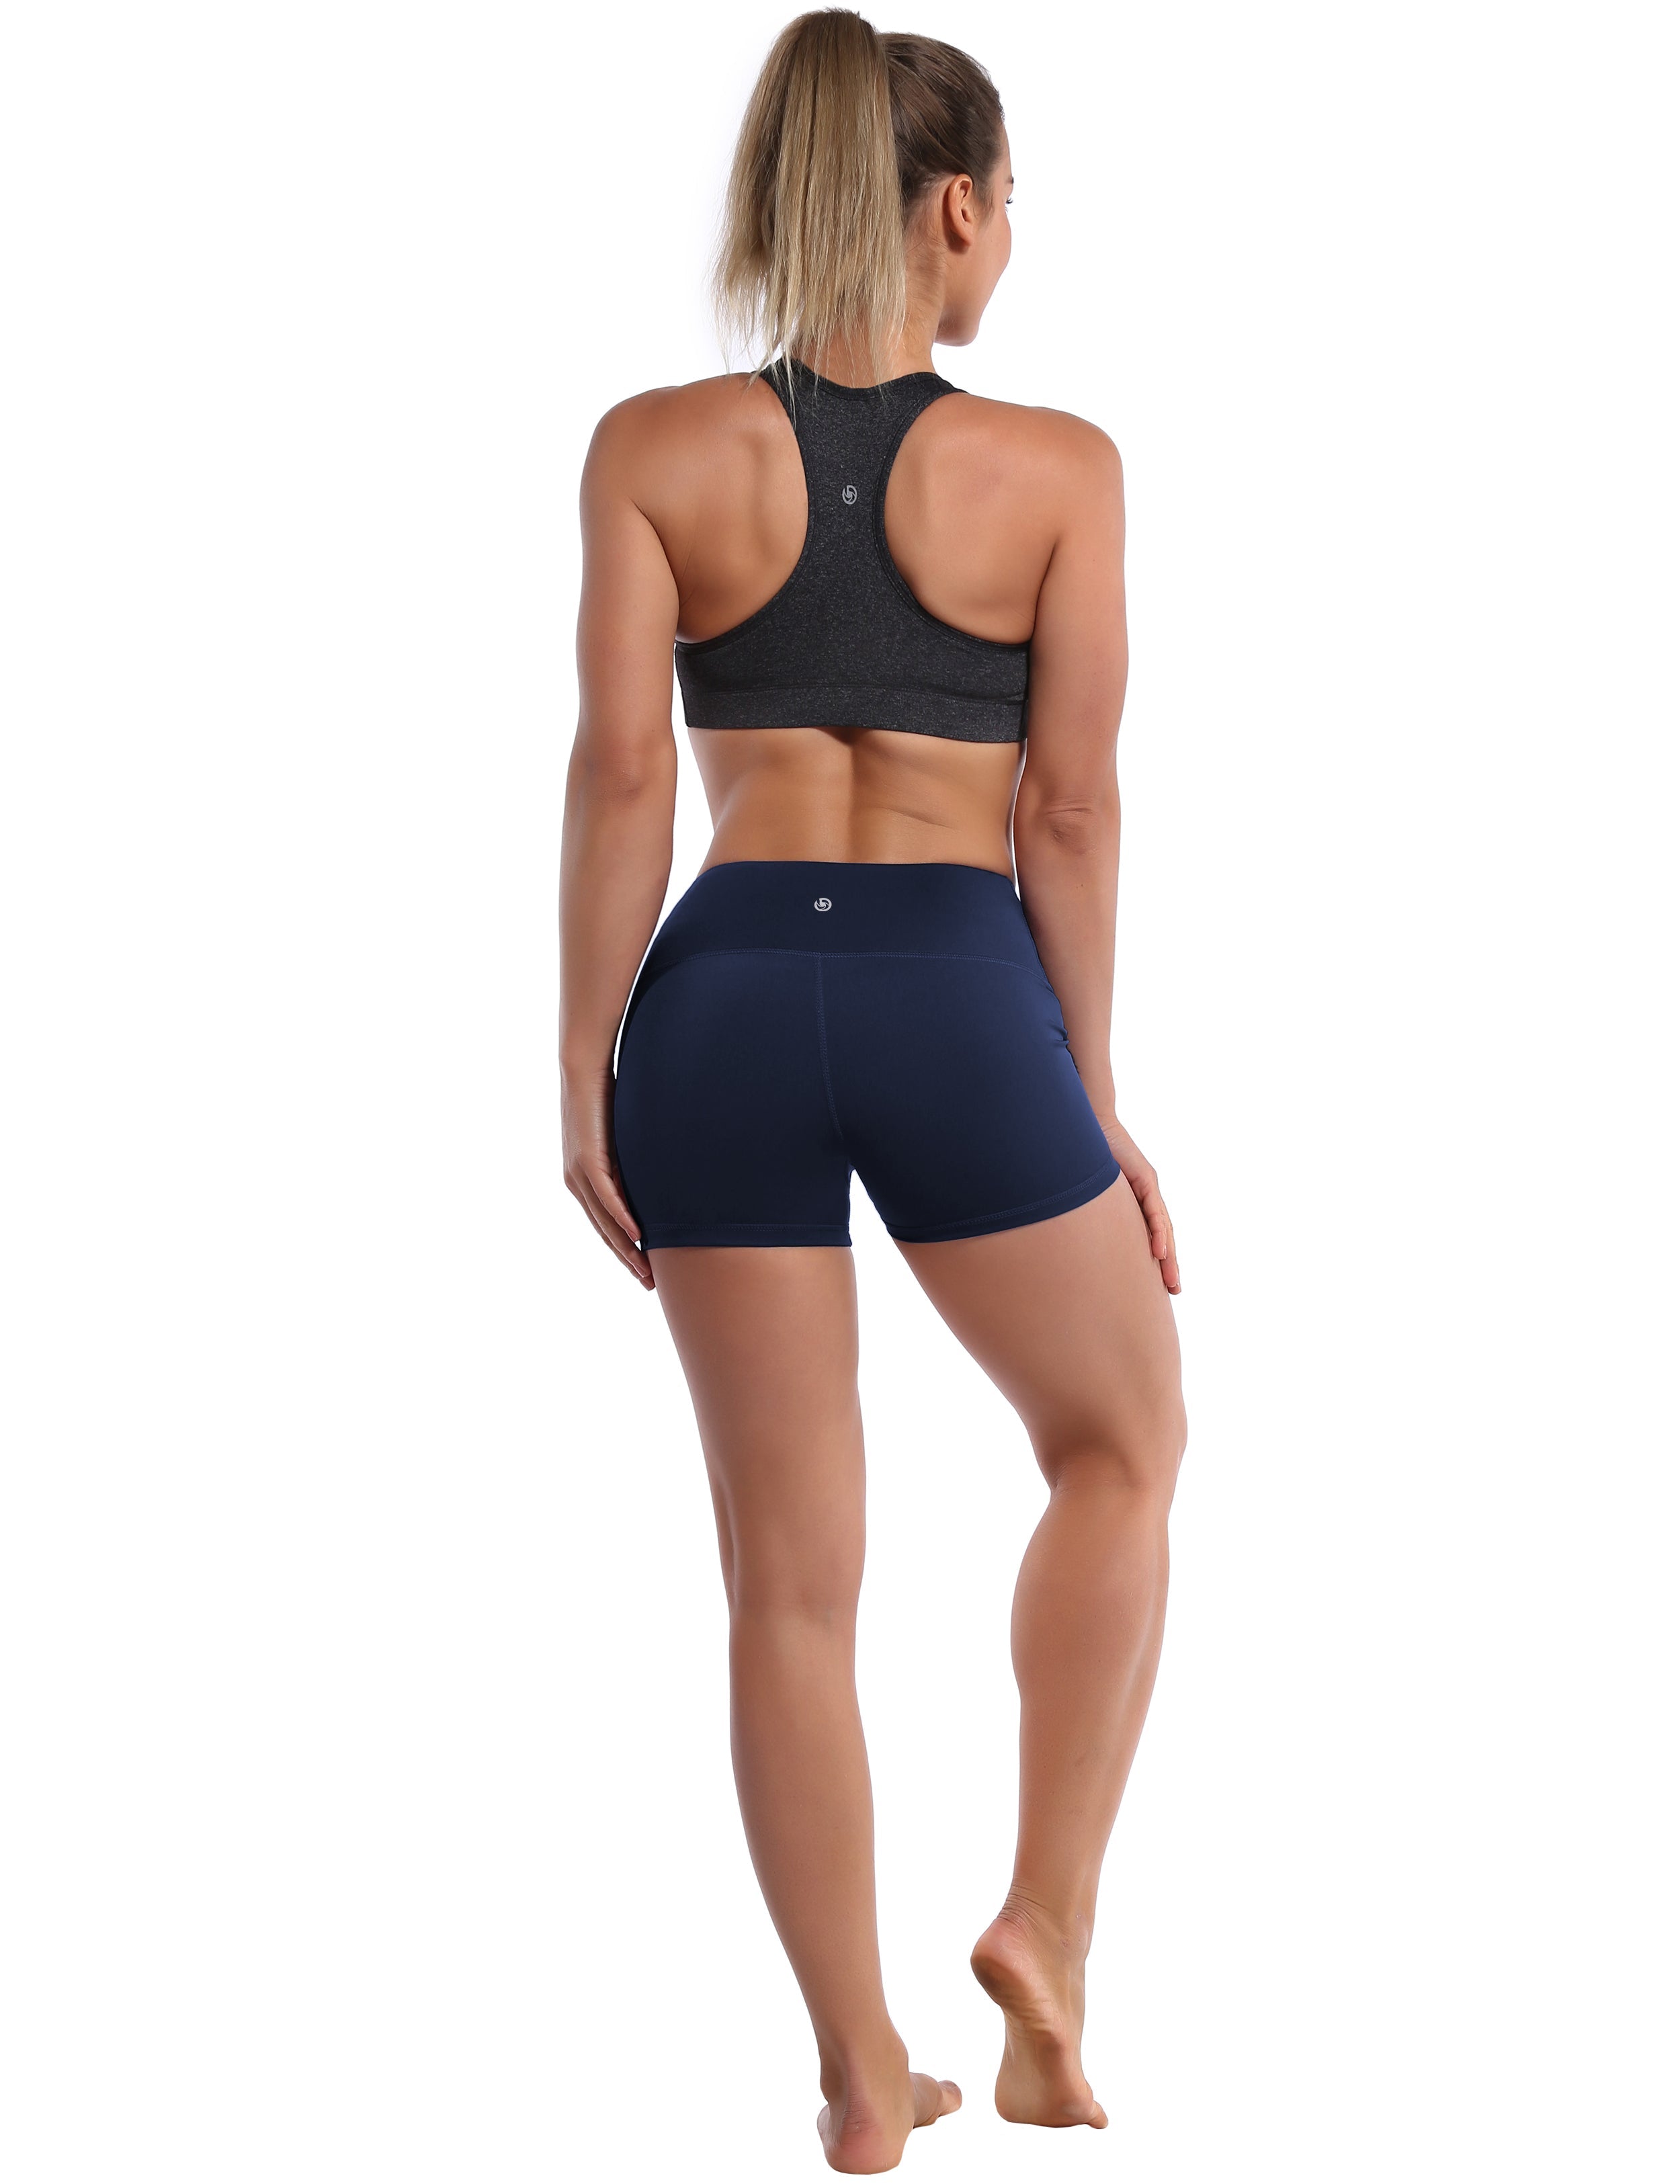 2.5" Running Shorts darknavy Softest-ever fabric High elasticity High density 4-way stretch Fabric doesn't attract lint easily No see-through Moisture-wicking Machine wash 75% Nylon, 25% Spandex